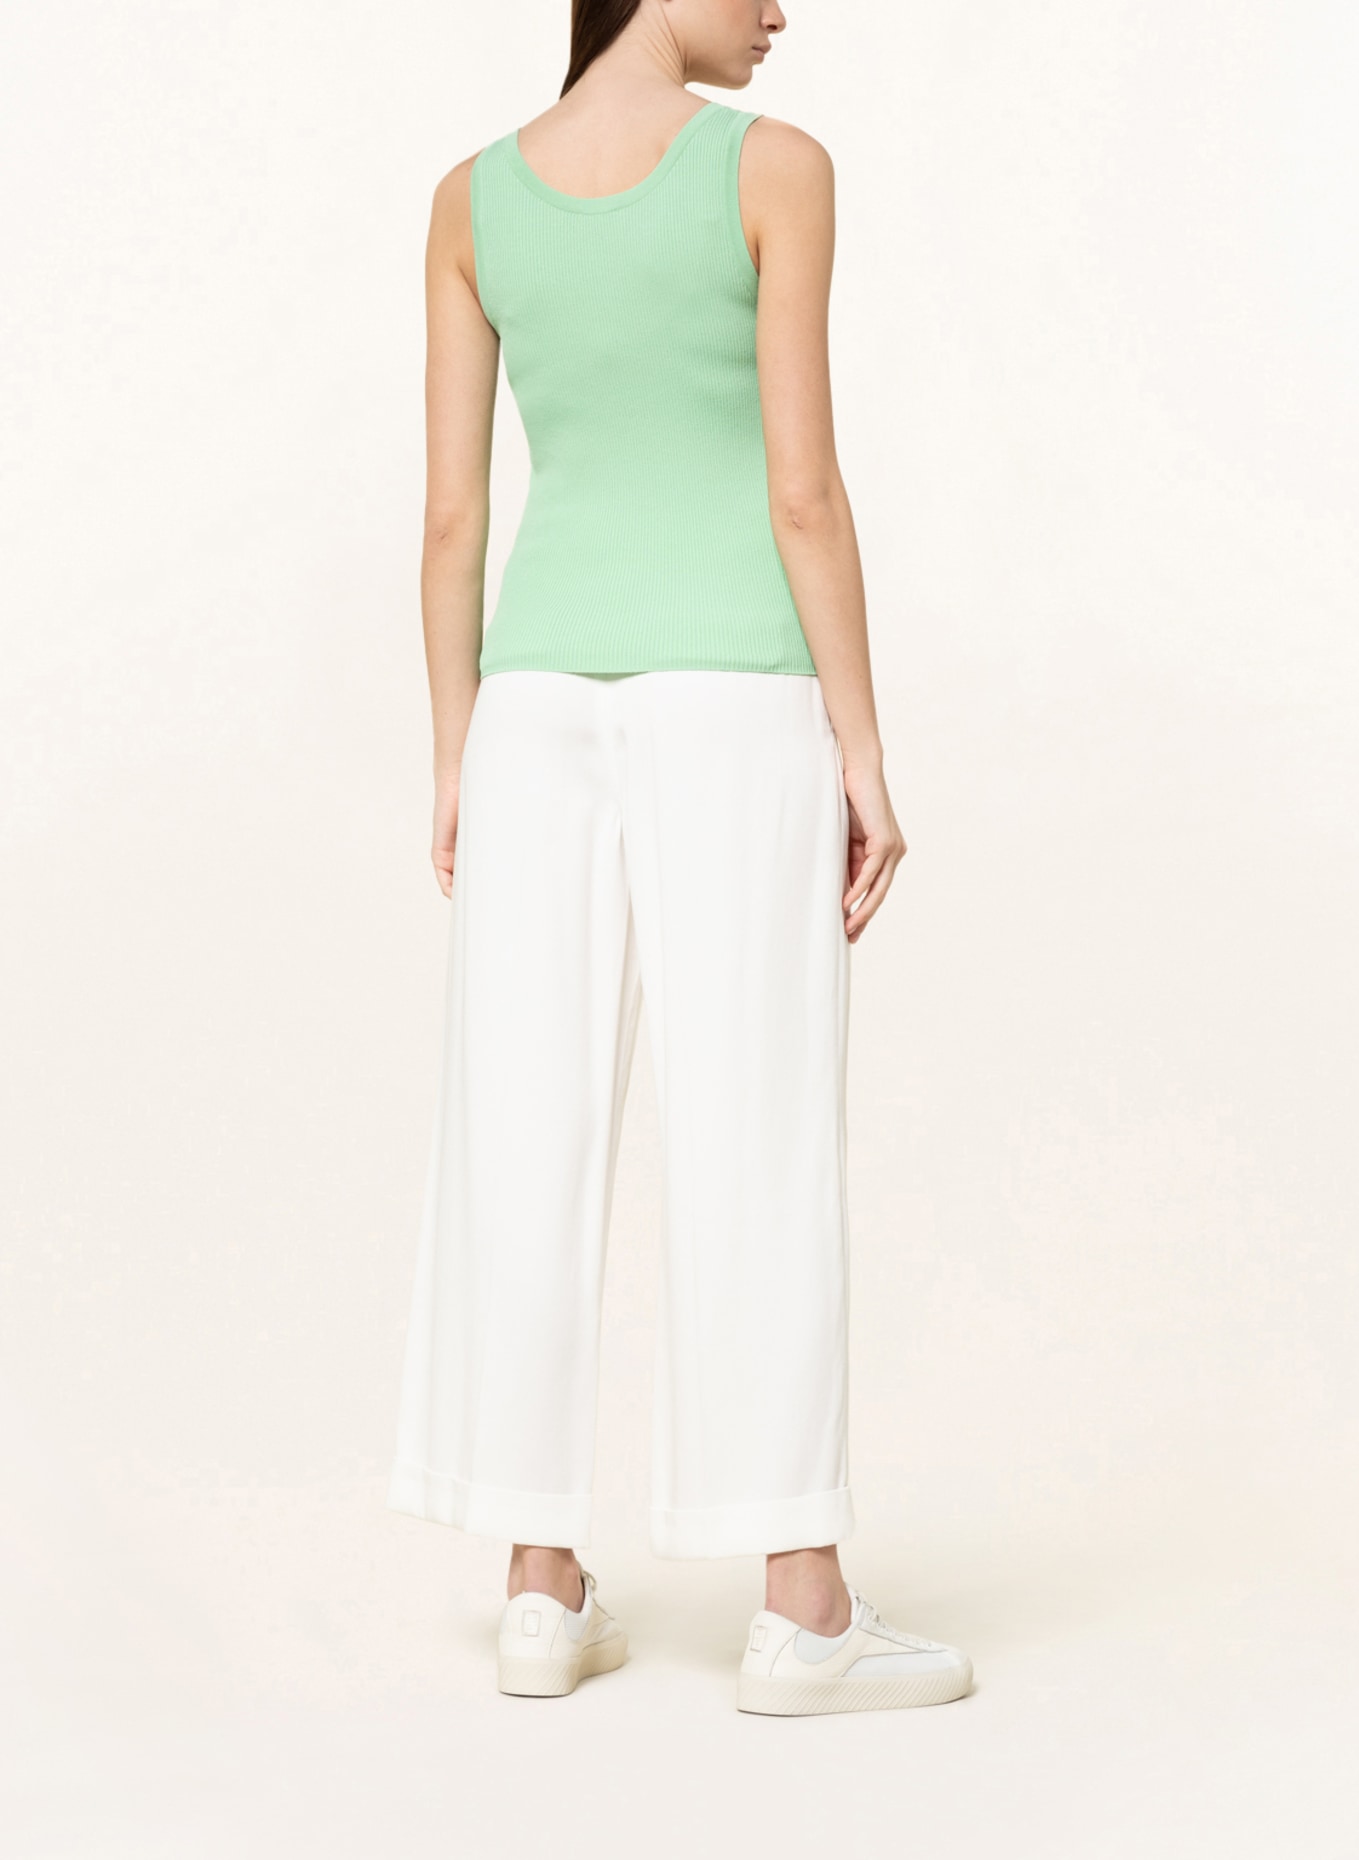 RIANI Knit top, Color: LIGHT GREEN (Image 3)